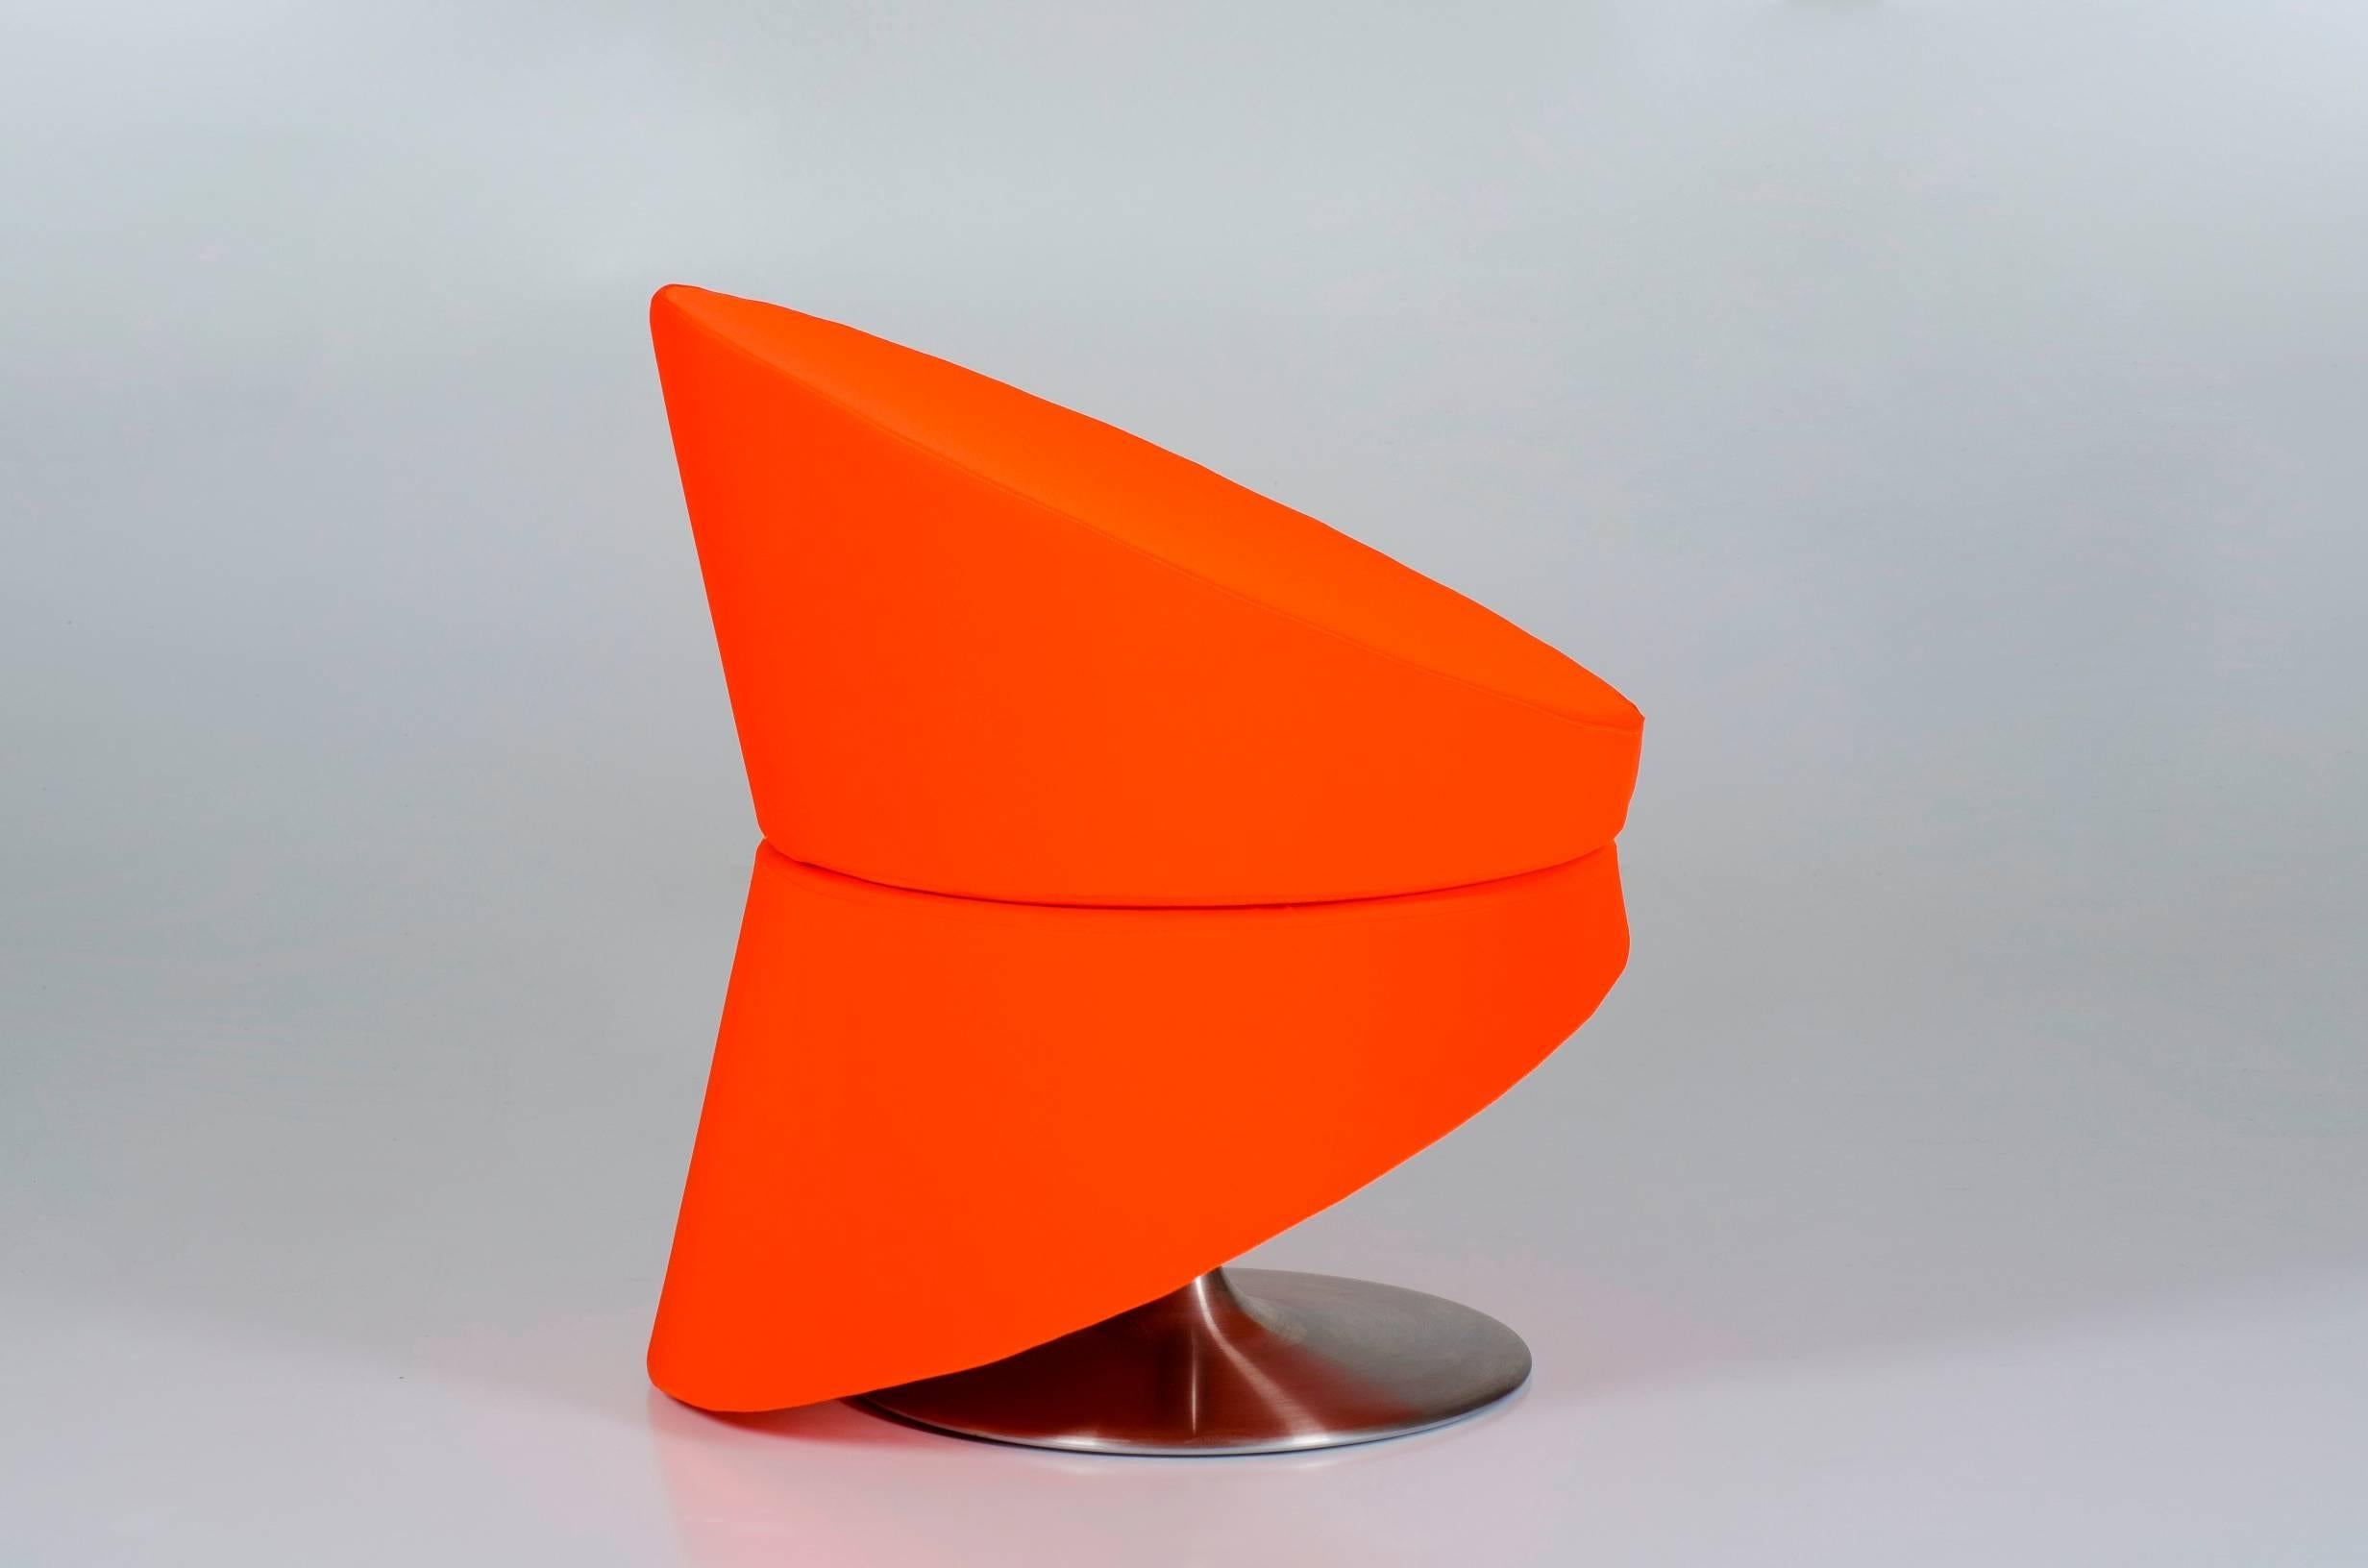 An ironic and fun poufs series. Every single seat reminds you of particular sensations and emotions. Unusual solid geometries for futurists rushes. An unexpected consistency and convenience for a rotating cone.
Handmade polyurethane body, steel